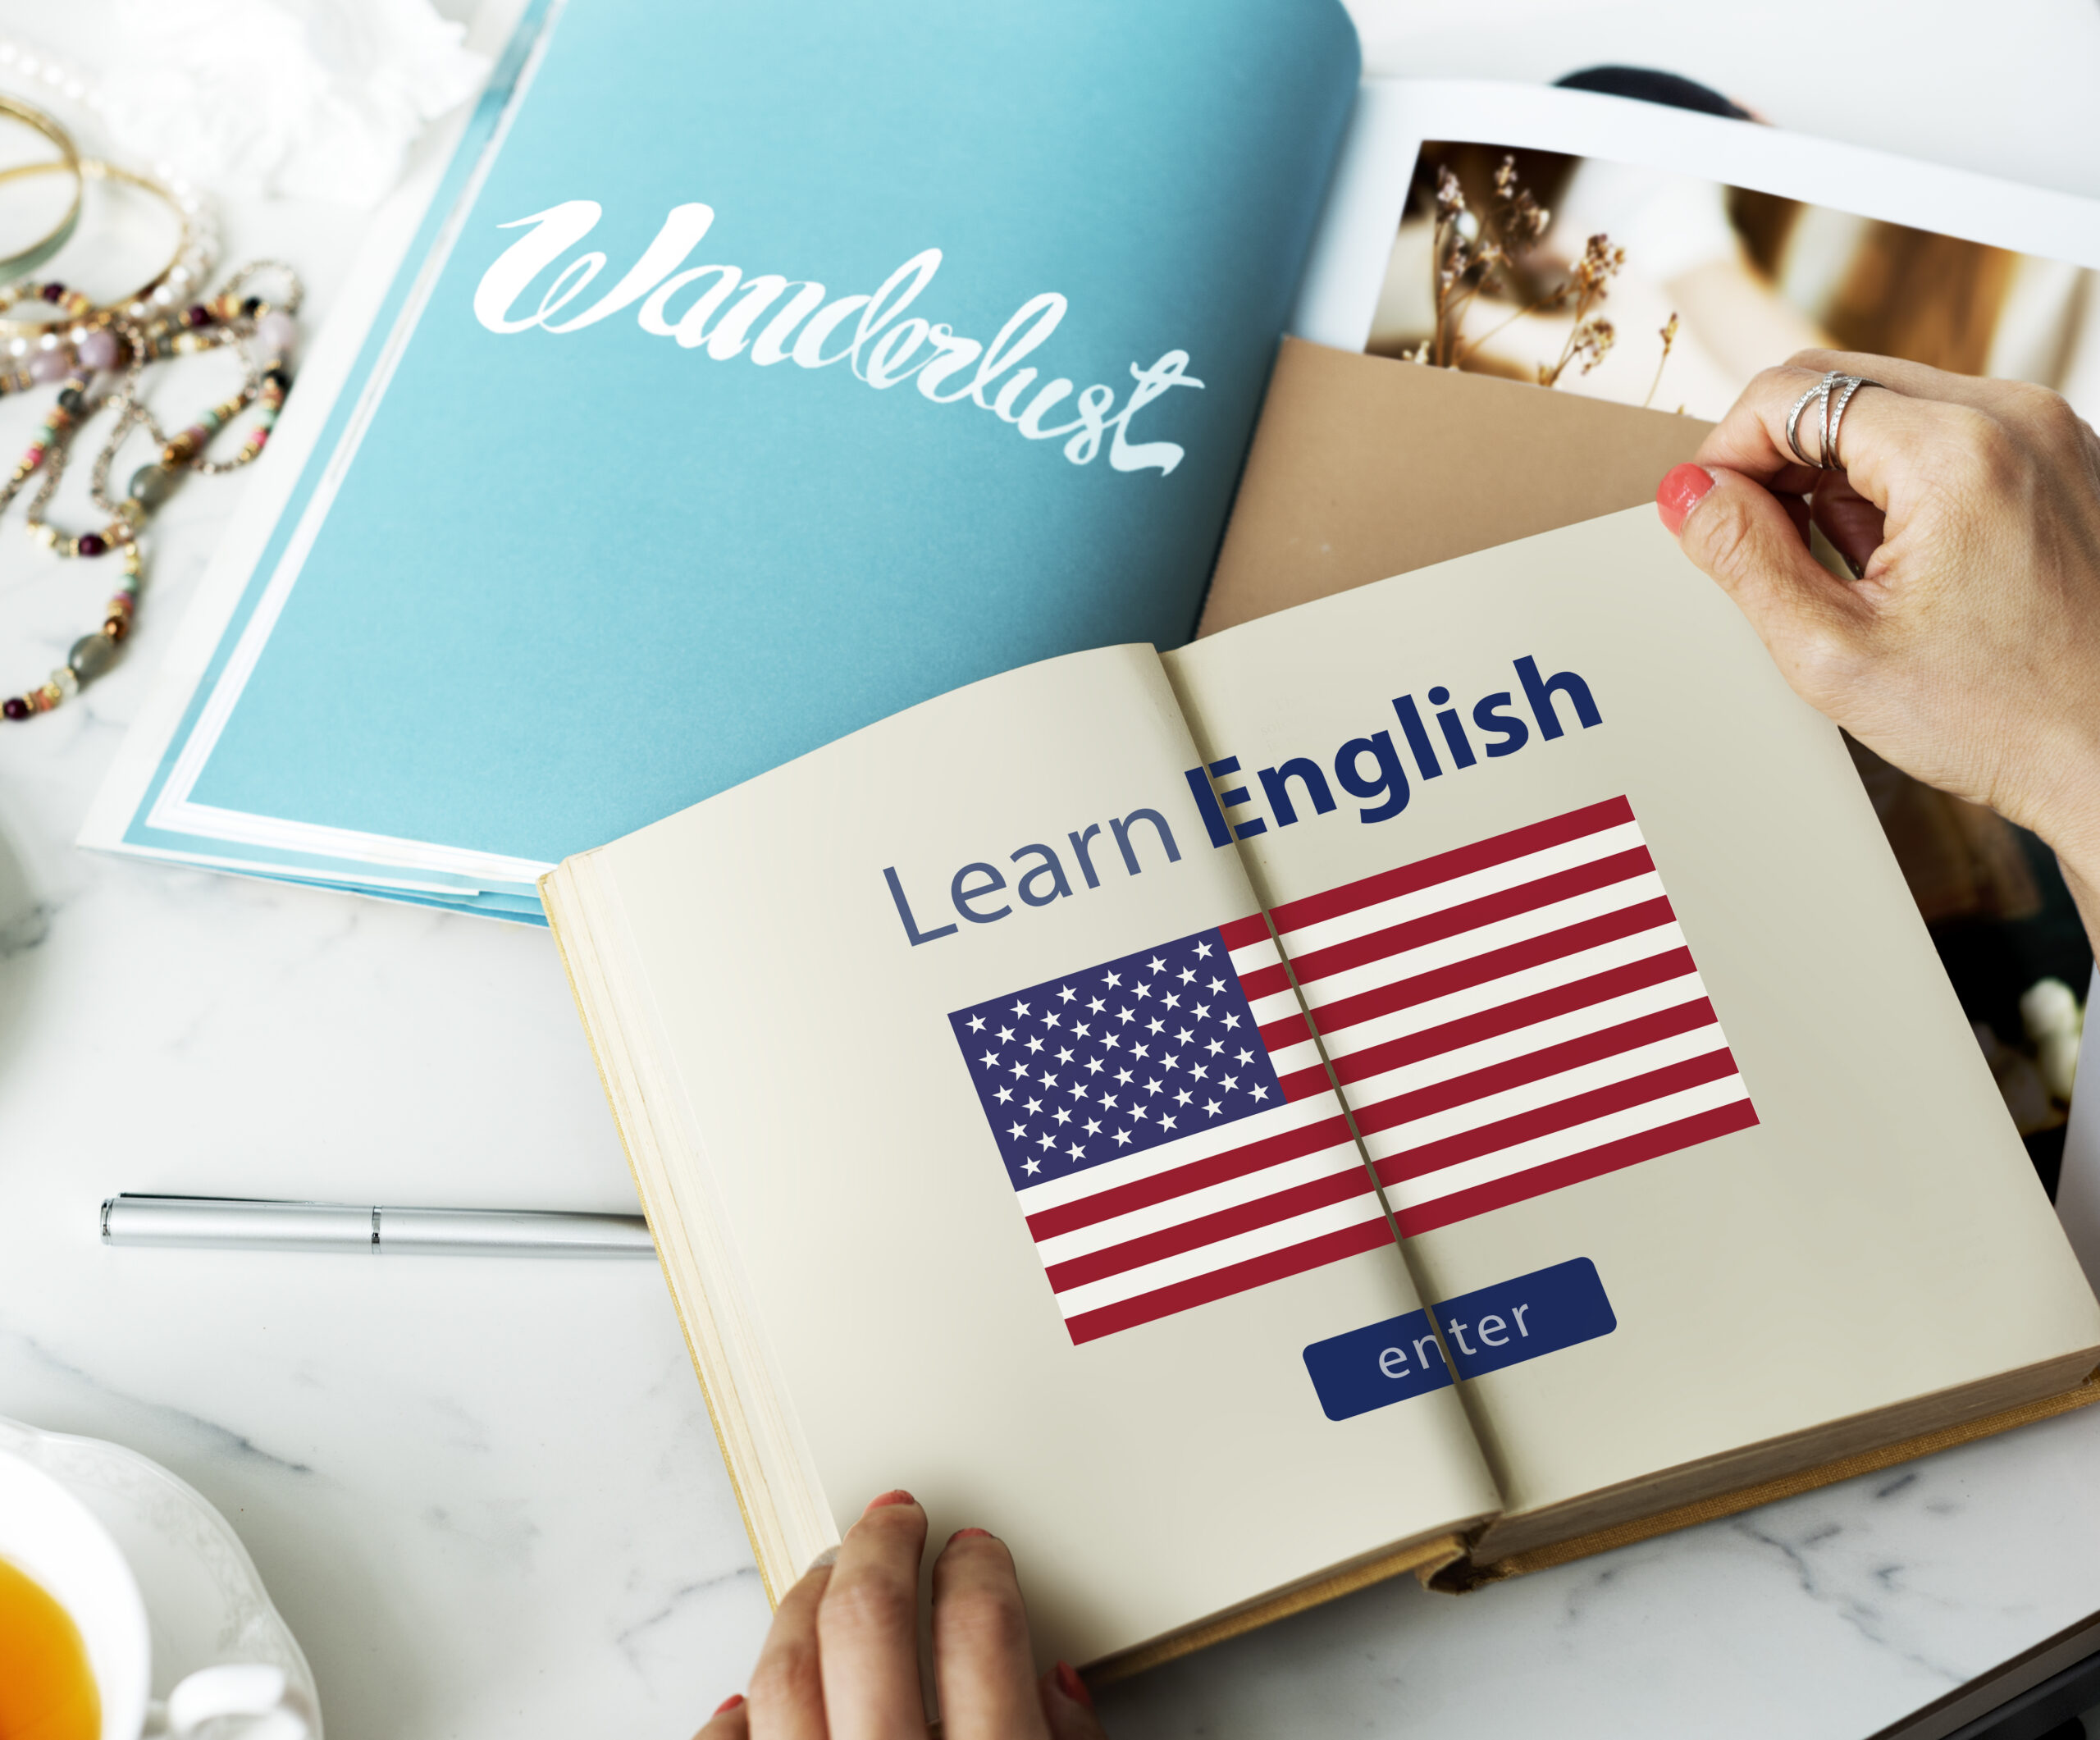 Learn English Language Online Education Concept